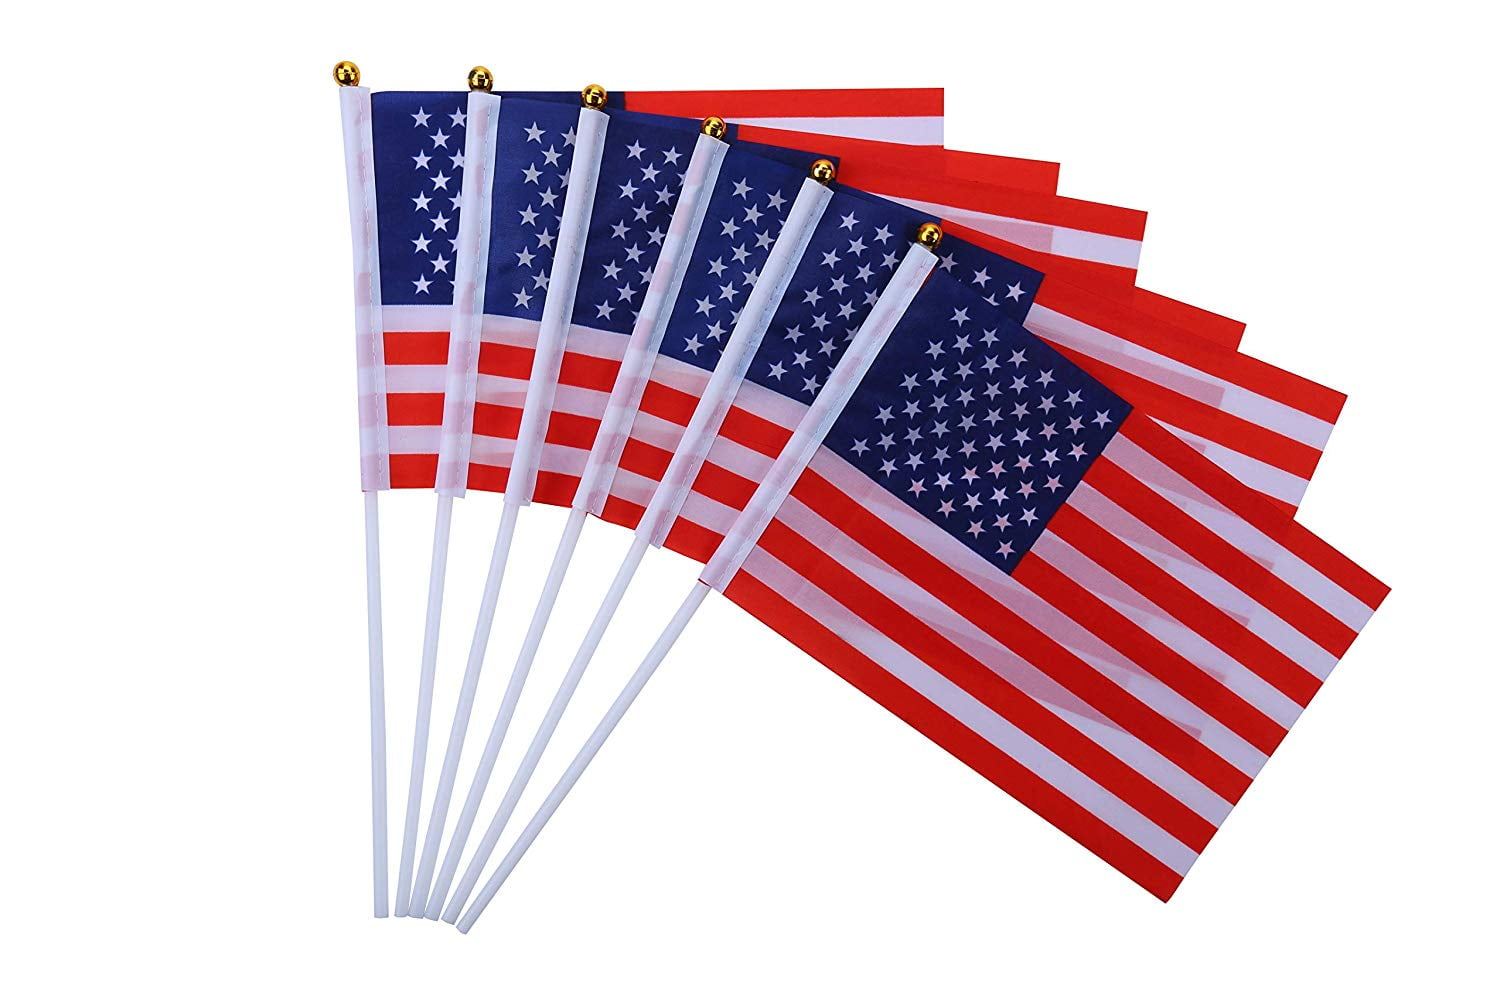 Dozen 4x6 12 Polyester Flags Guyana Miniature Desk & Table Flag Includes 12 Polyester Small Mini Stick Flags Ant Enterprise Pack of 12